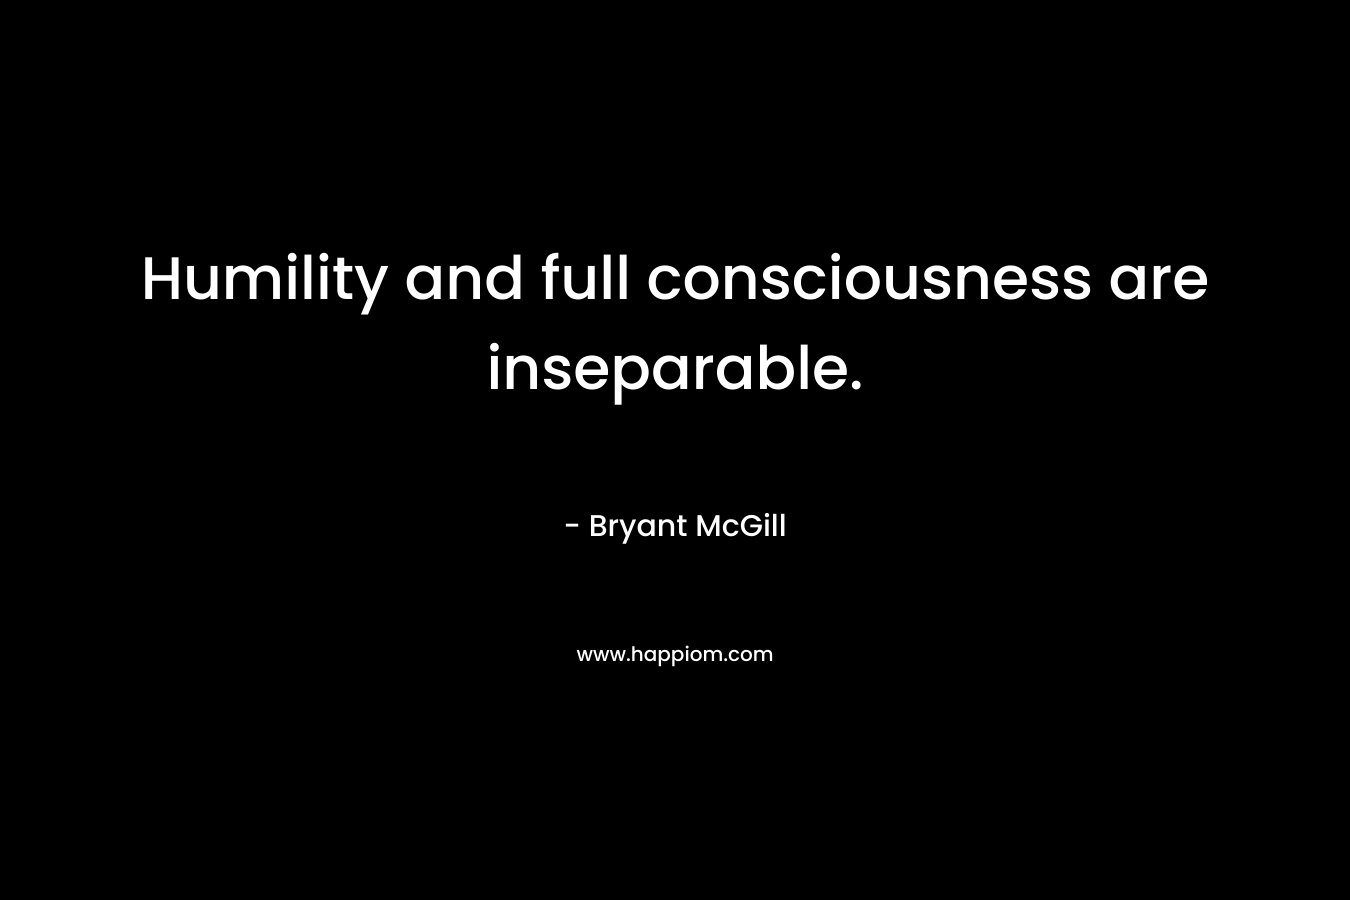 Humility and full consciousness are inseparable.